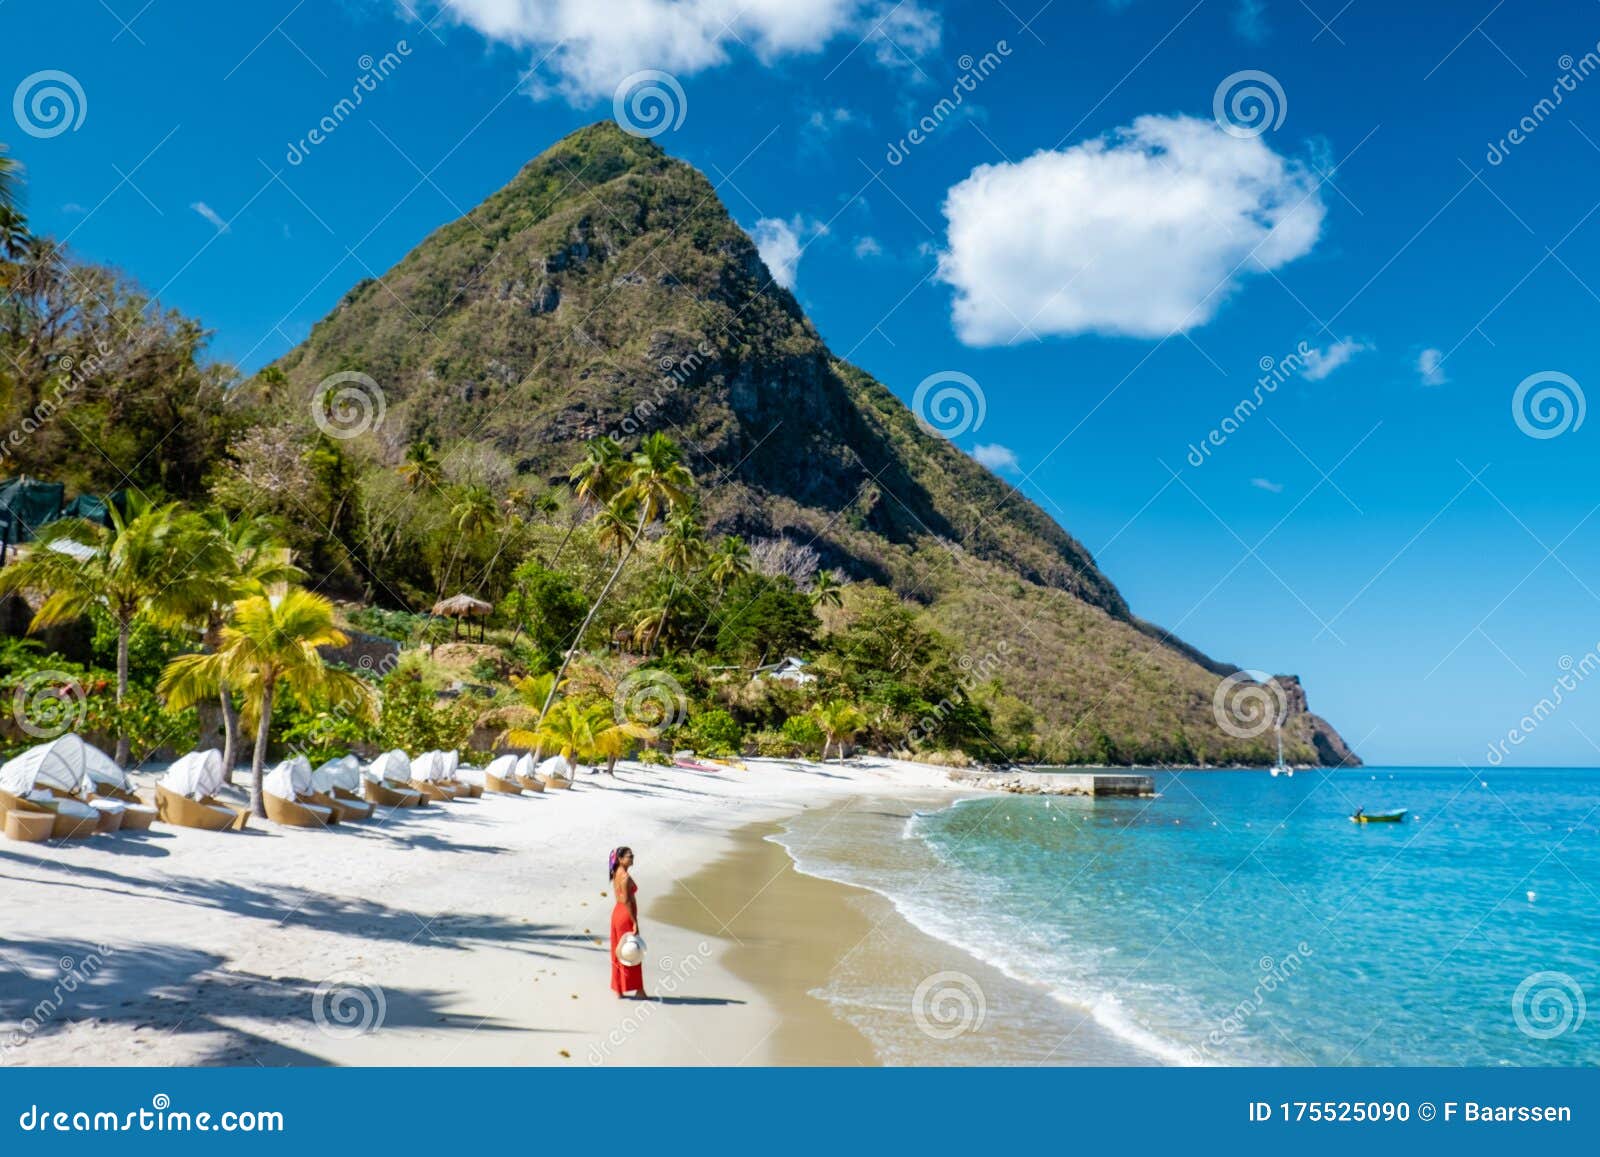 st lucia caribbean, woman on vacation at the tropical island of saint lucia